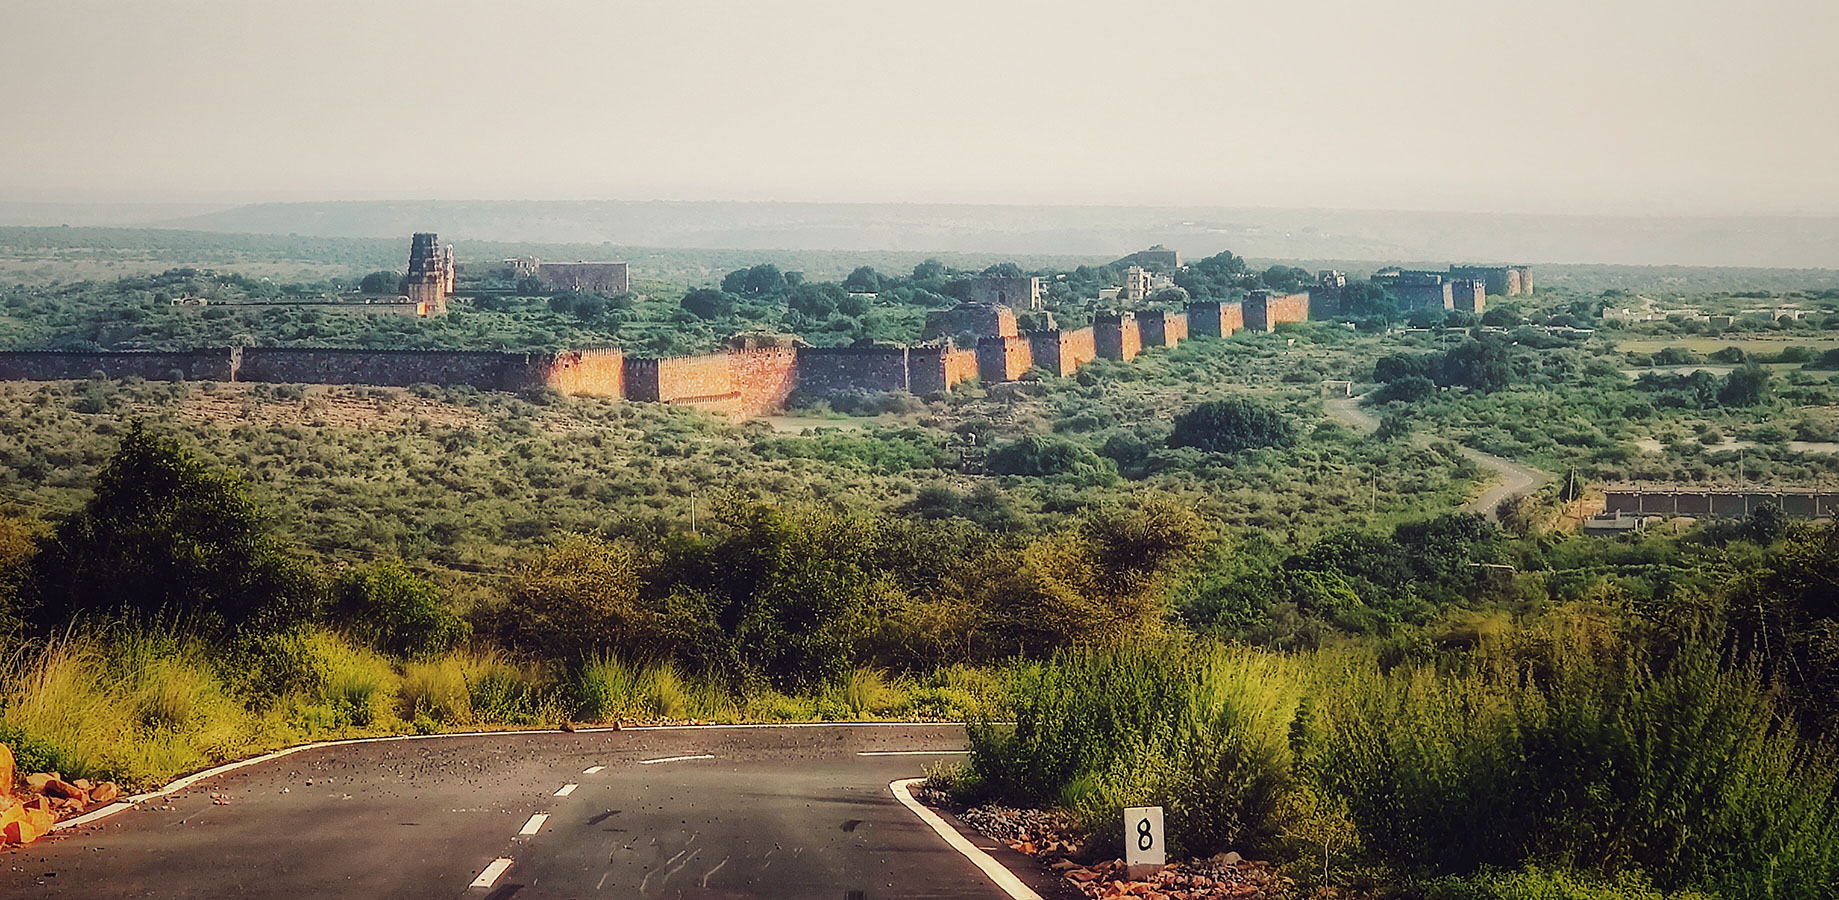 Landscape of the ruins of Gandikota Fort from an uphill drive to the Wind Power Station